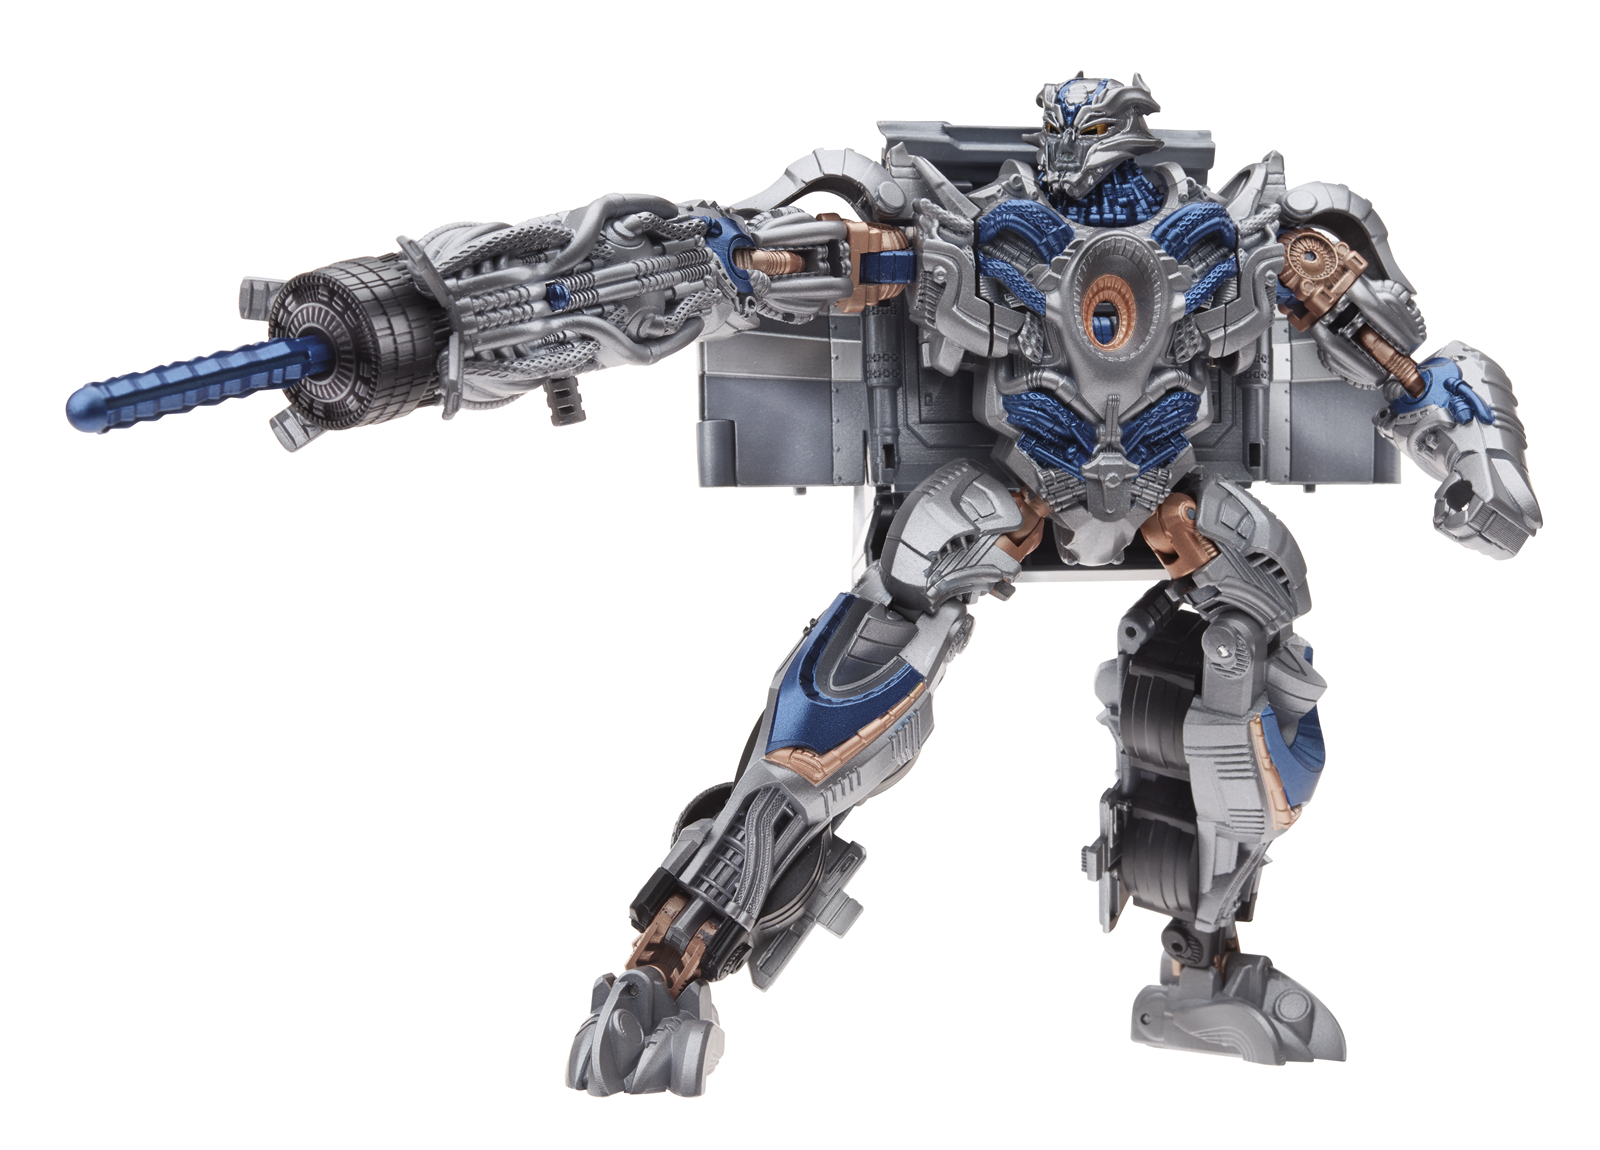 Video Review - Transformers: Age of Extinction Voyager Galvatron